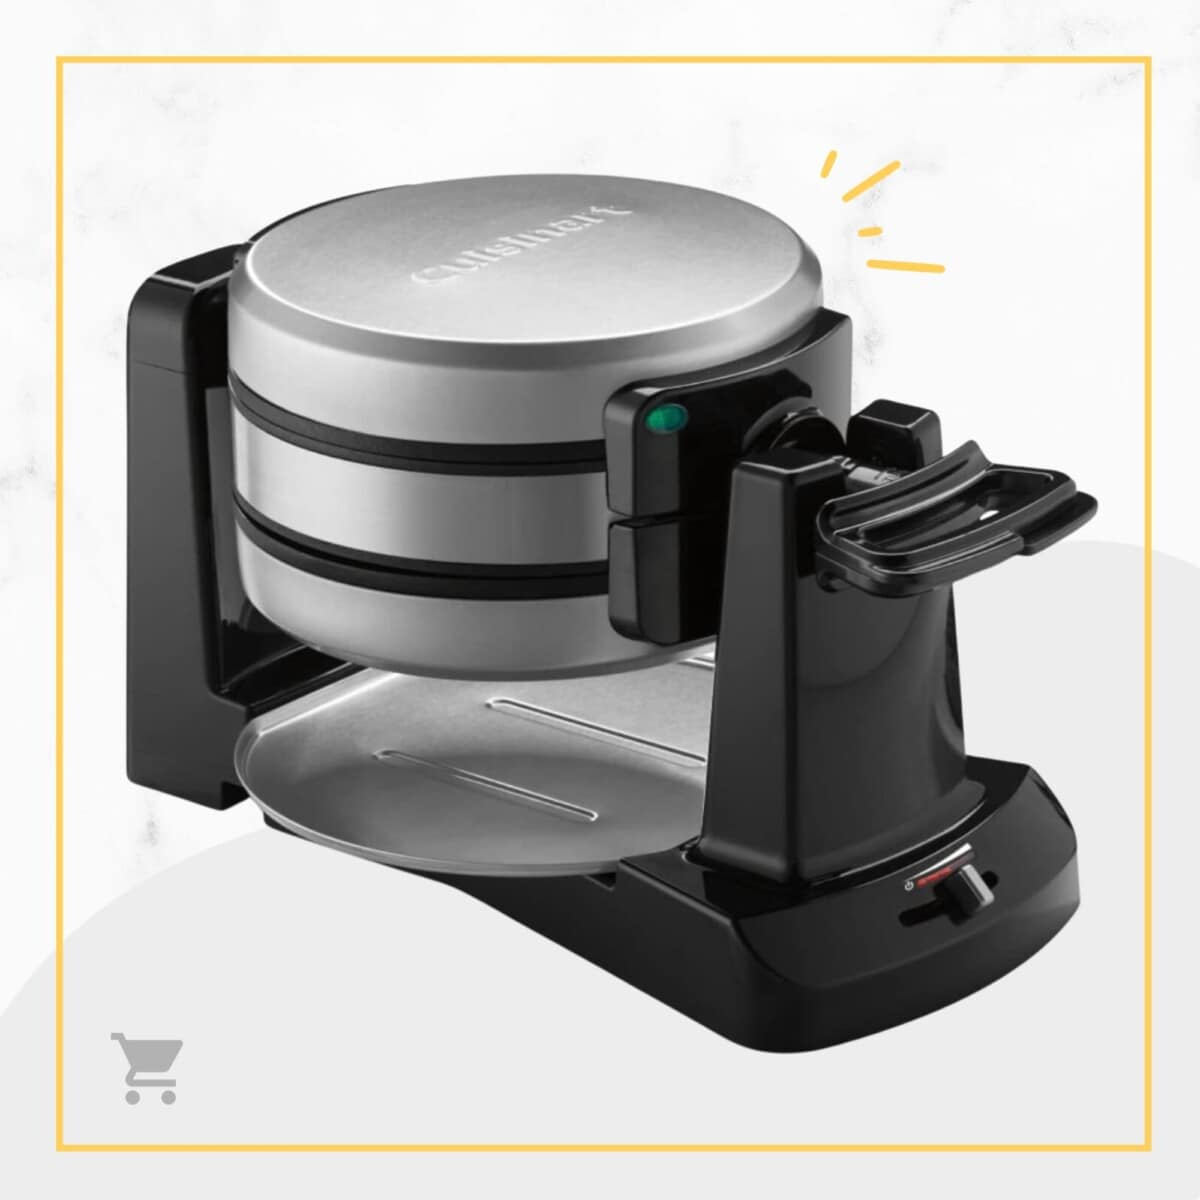 An image of a waffle maker on a white background.